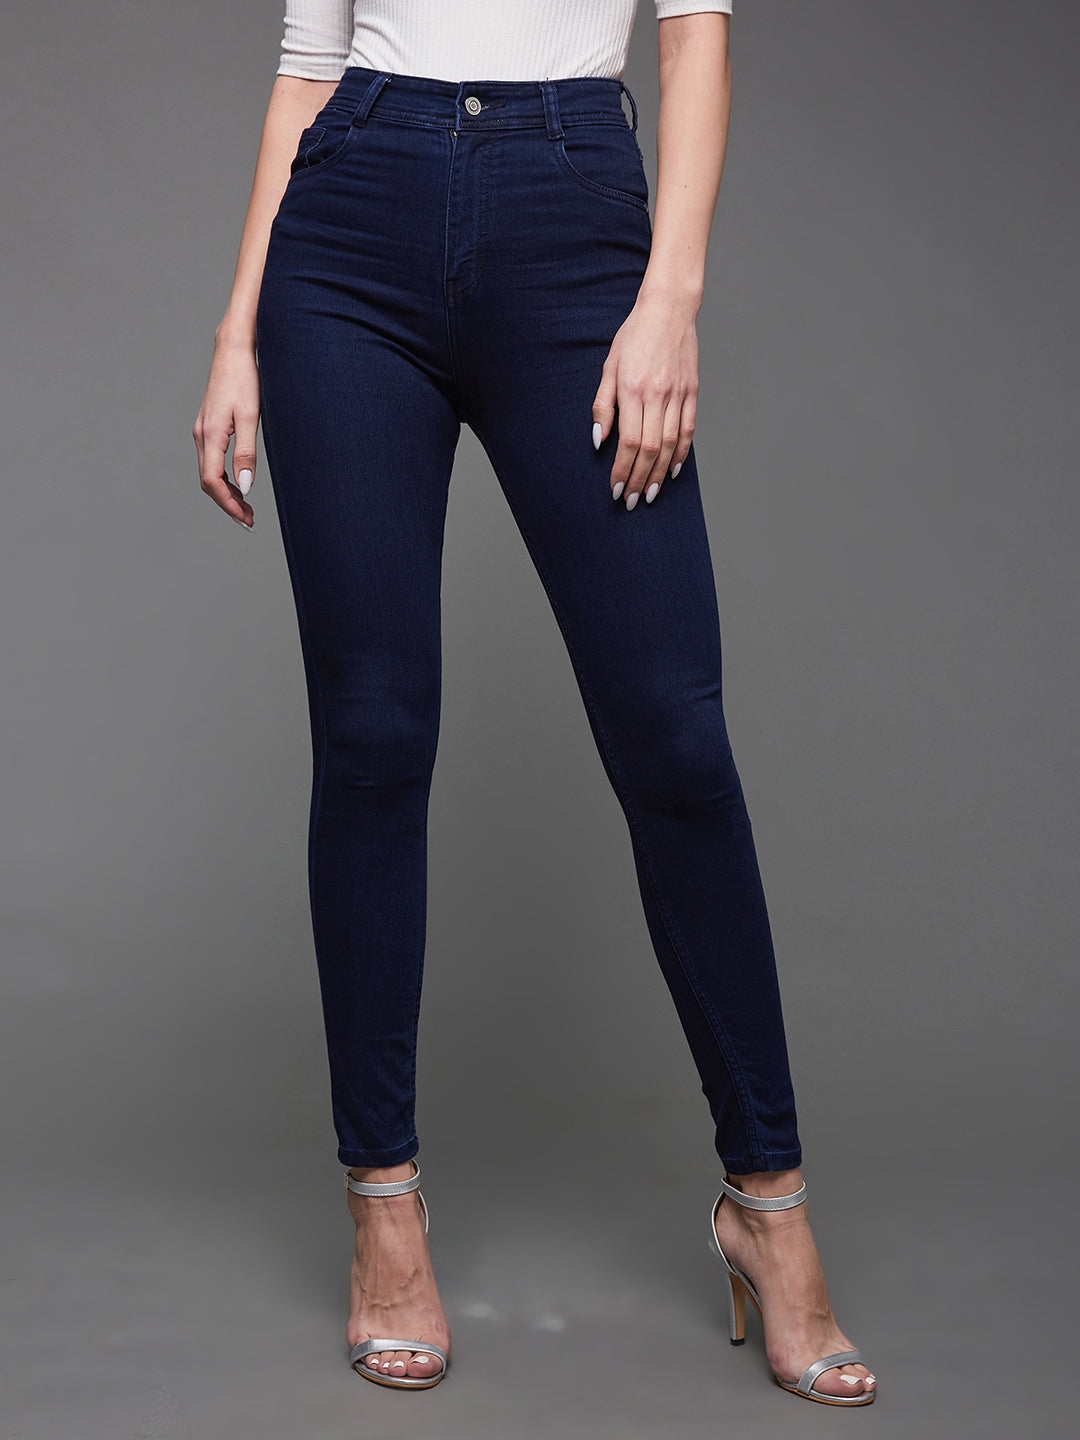 Navy Blue Skinny Fit High Rise Clean Look Regular Length Stretchable Denim Jeans